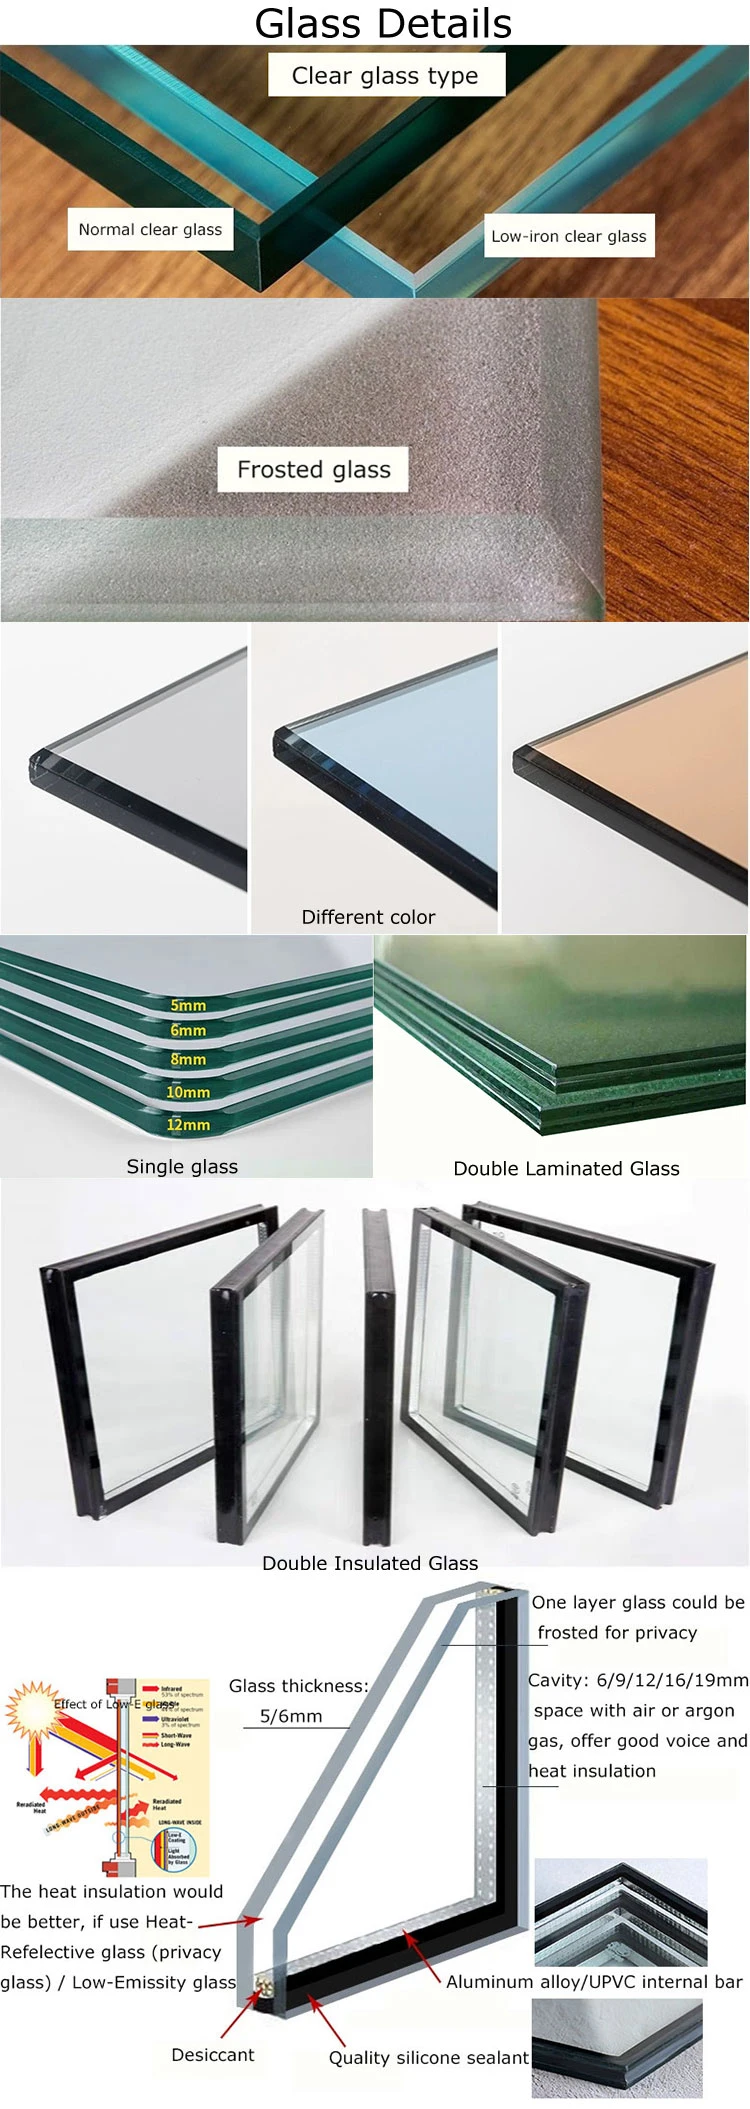 Popular and Common Open Type UPVC/PVC Profile Clear Glass Sliding Windows with Grills